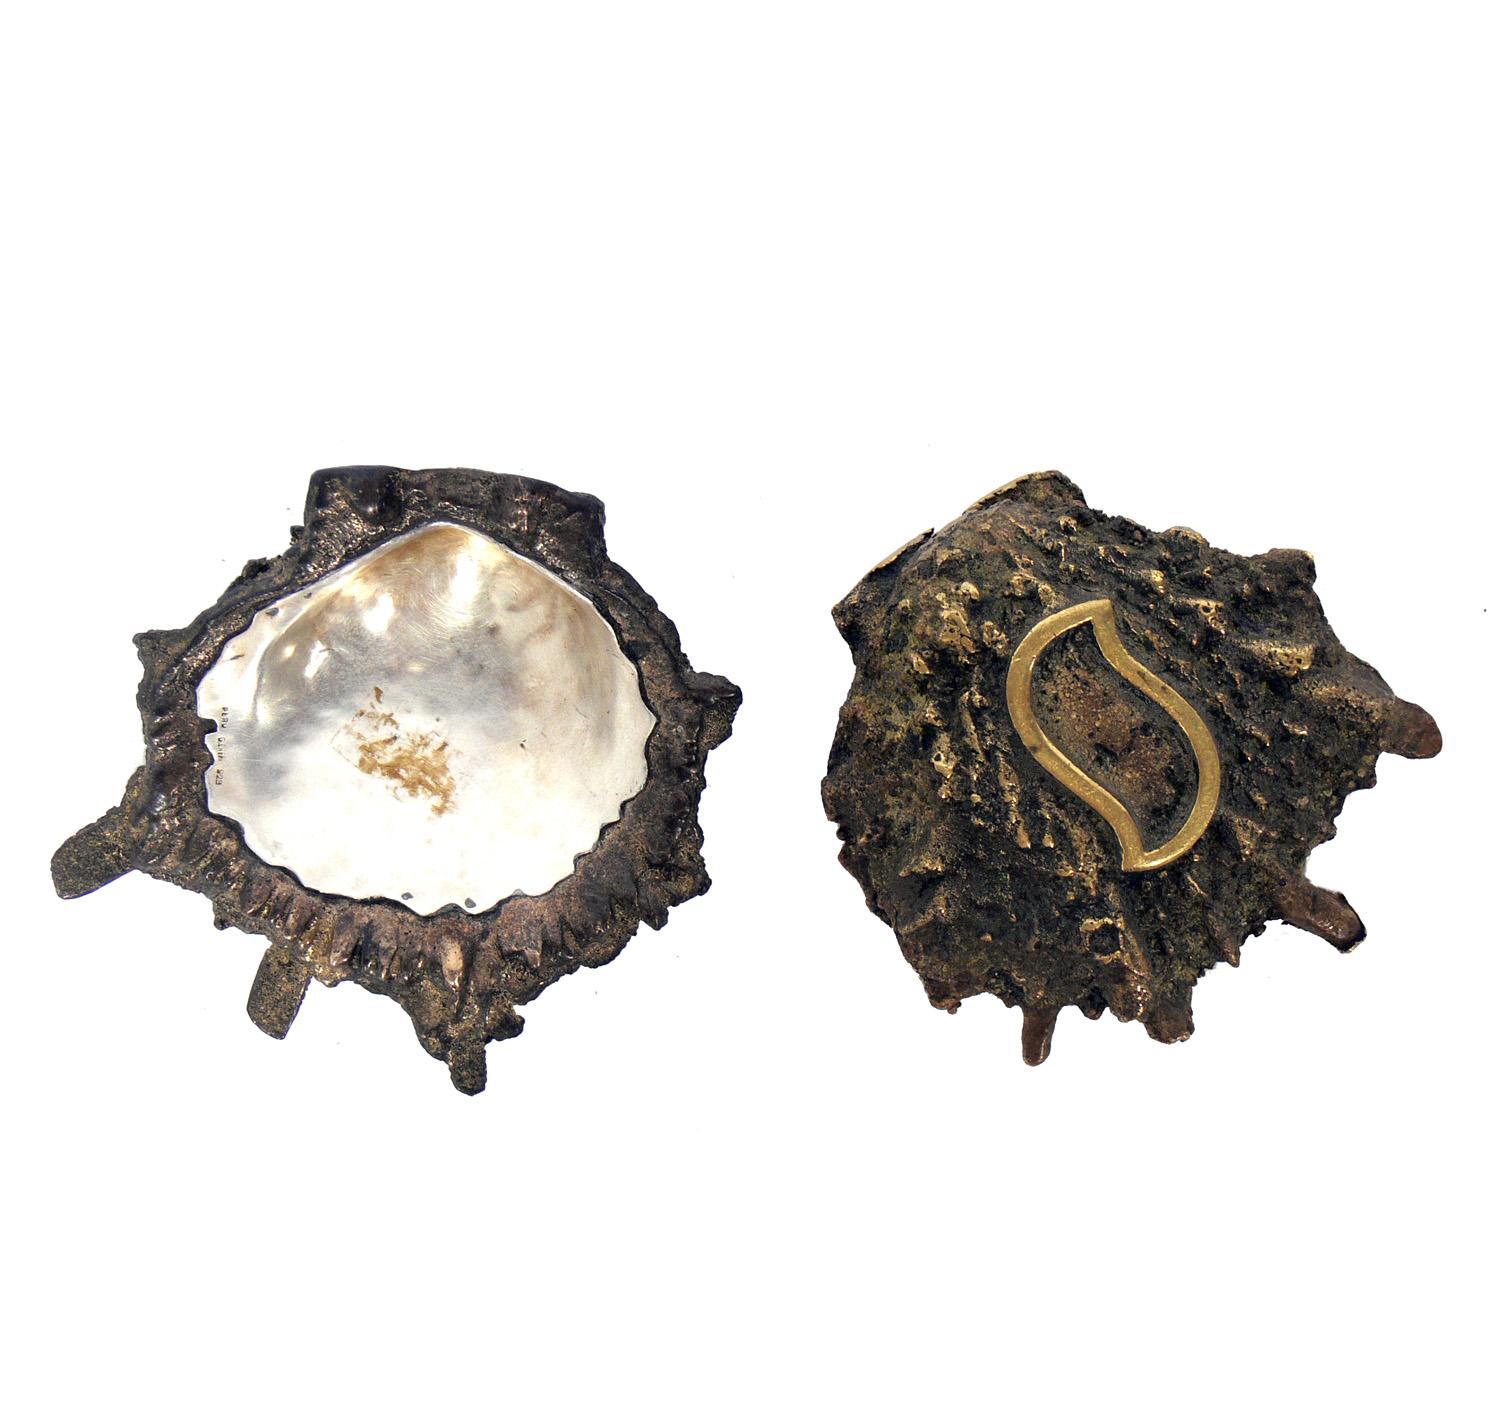 Graziella Laffi bronze shell form bowls, Peru, circa 1950s. They are constructed of bronze and silver plated brass. They are a petite size, perfect as a home for your rings, coins, paper clips, or detritus of the day. They retain their warm original